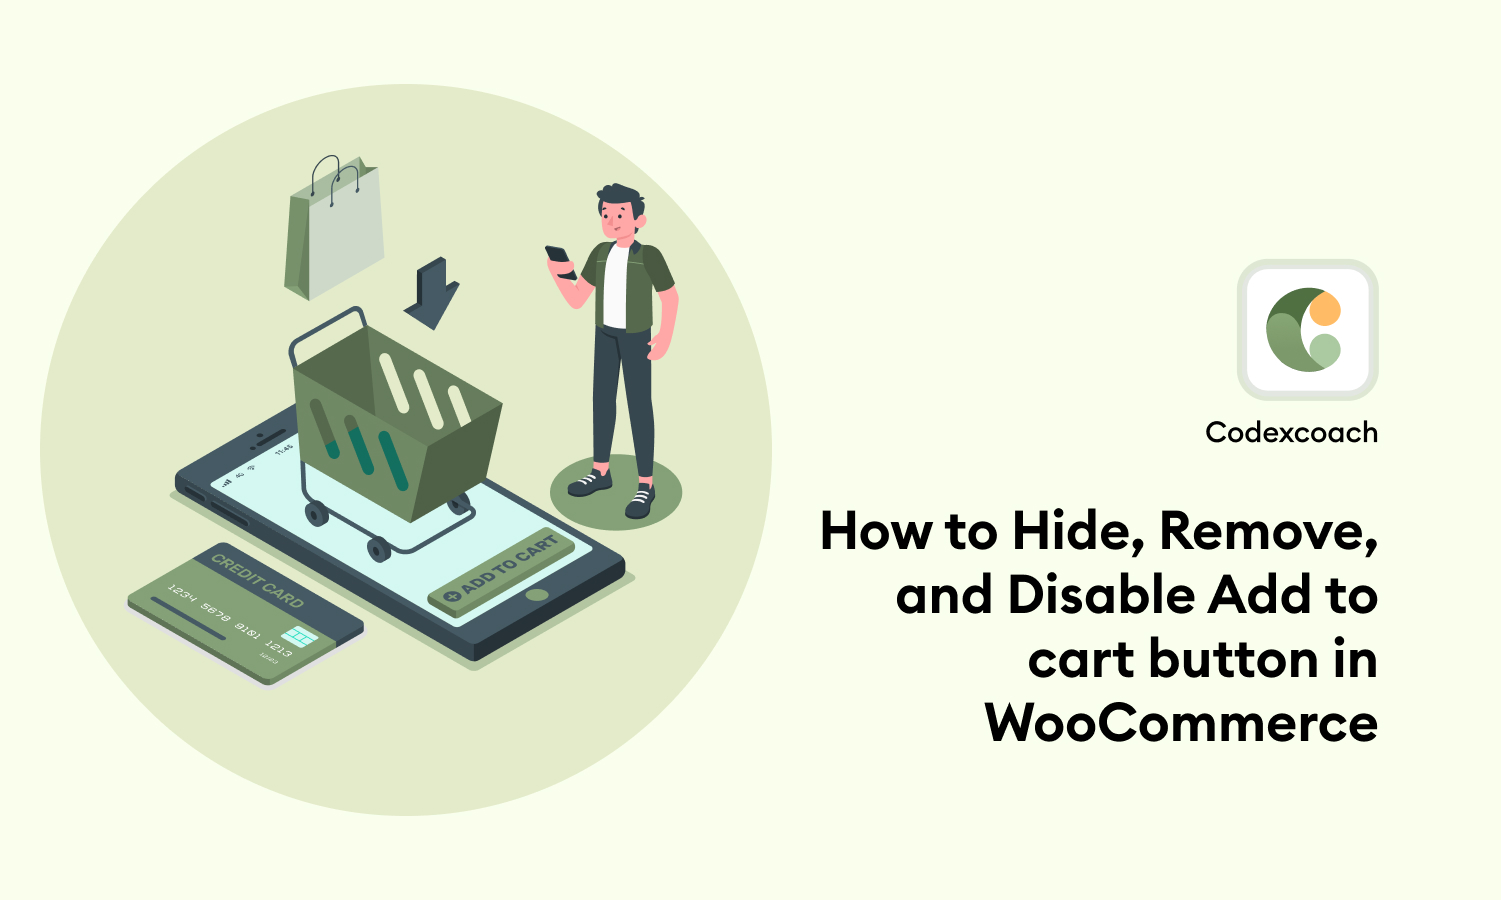 How to Hide, Remove, and Disable Add to cart button in WooCommerce (1)